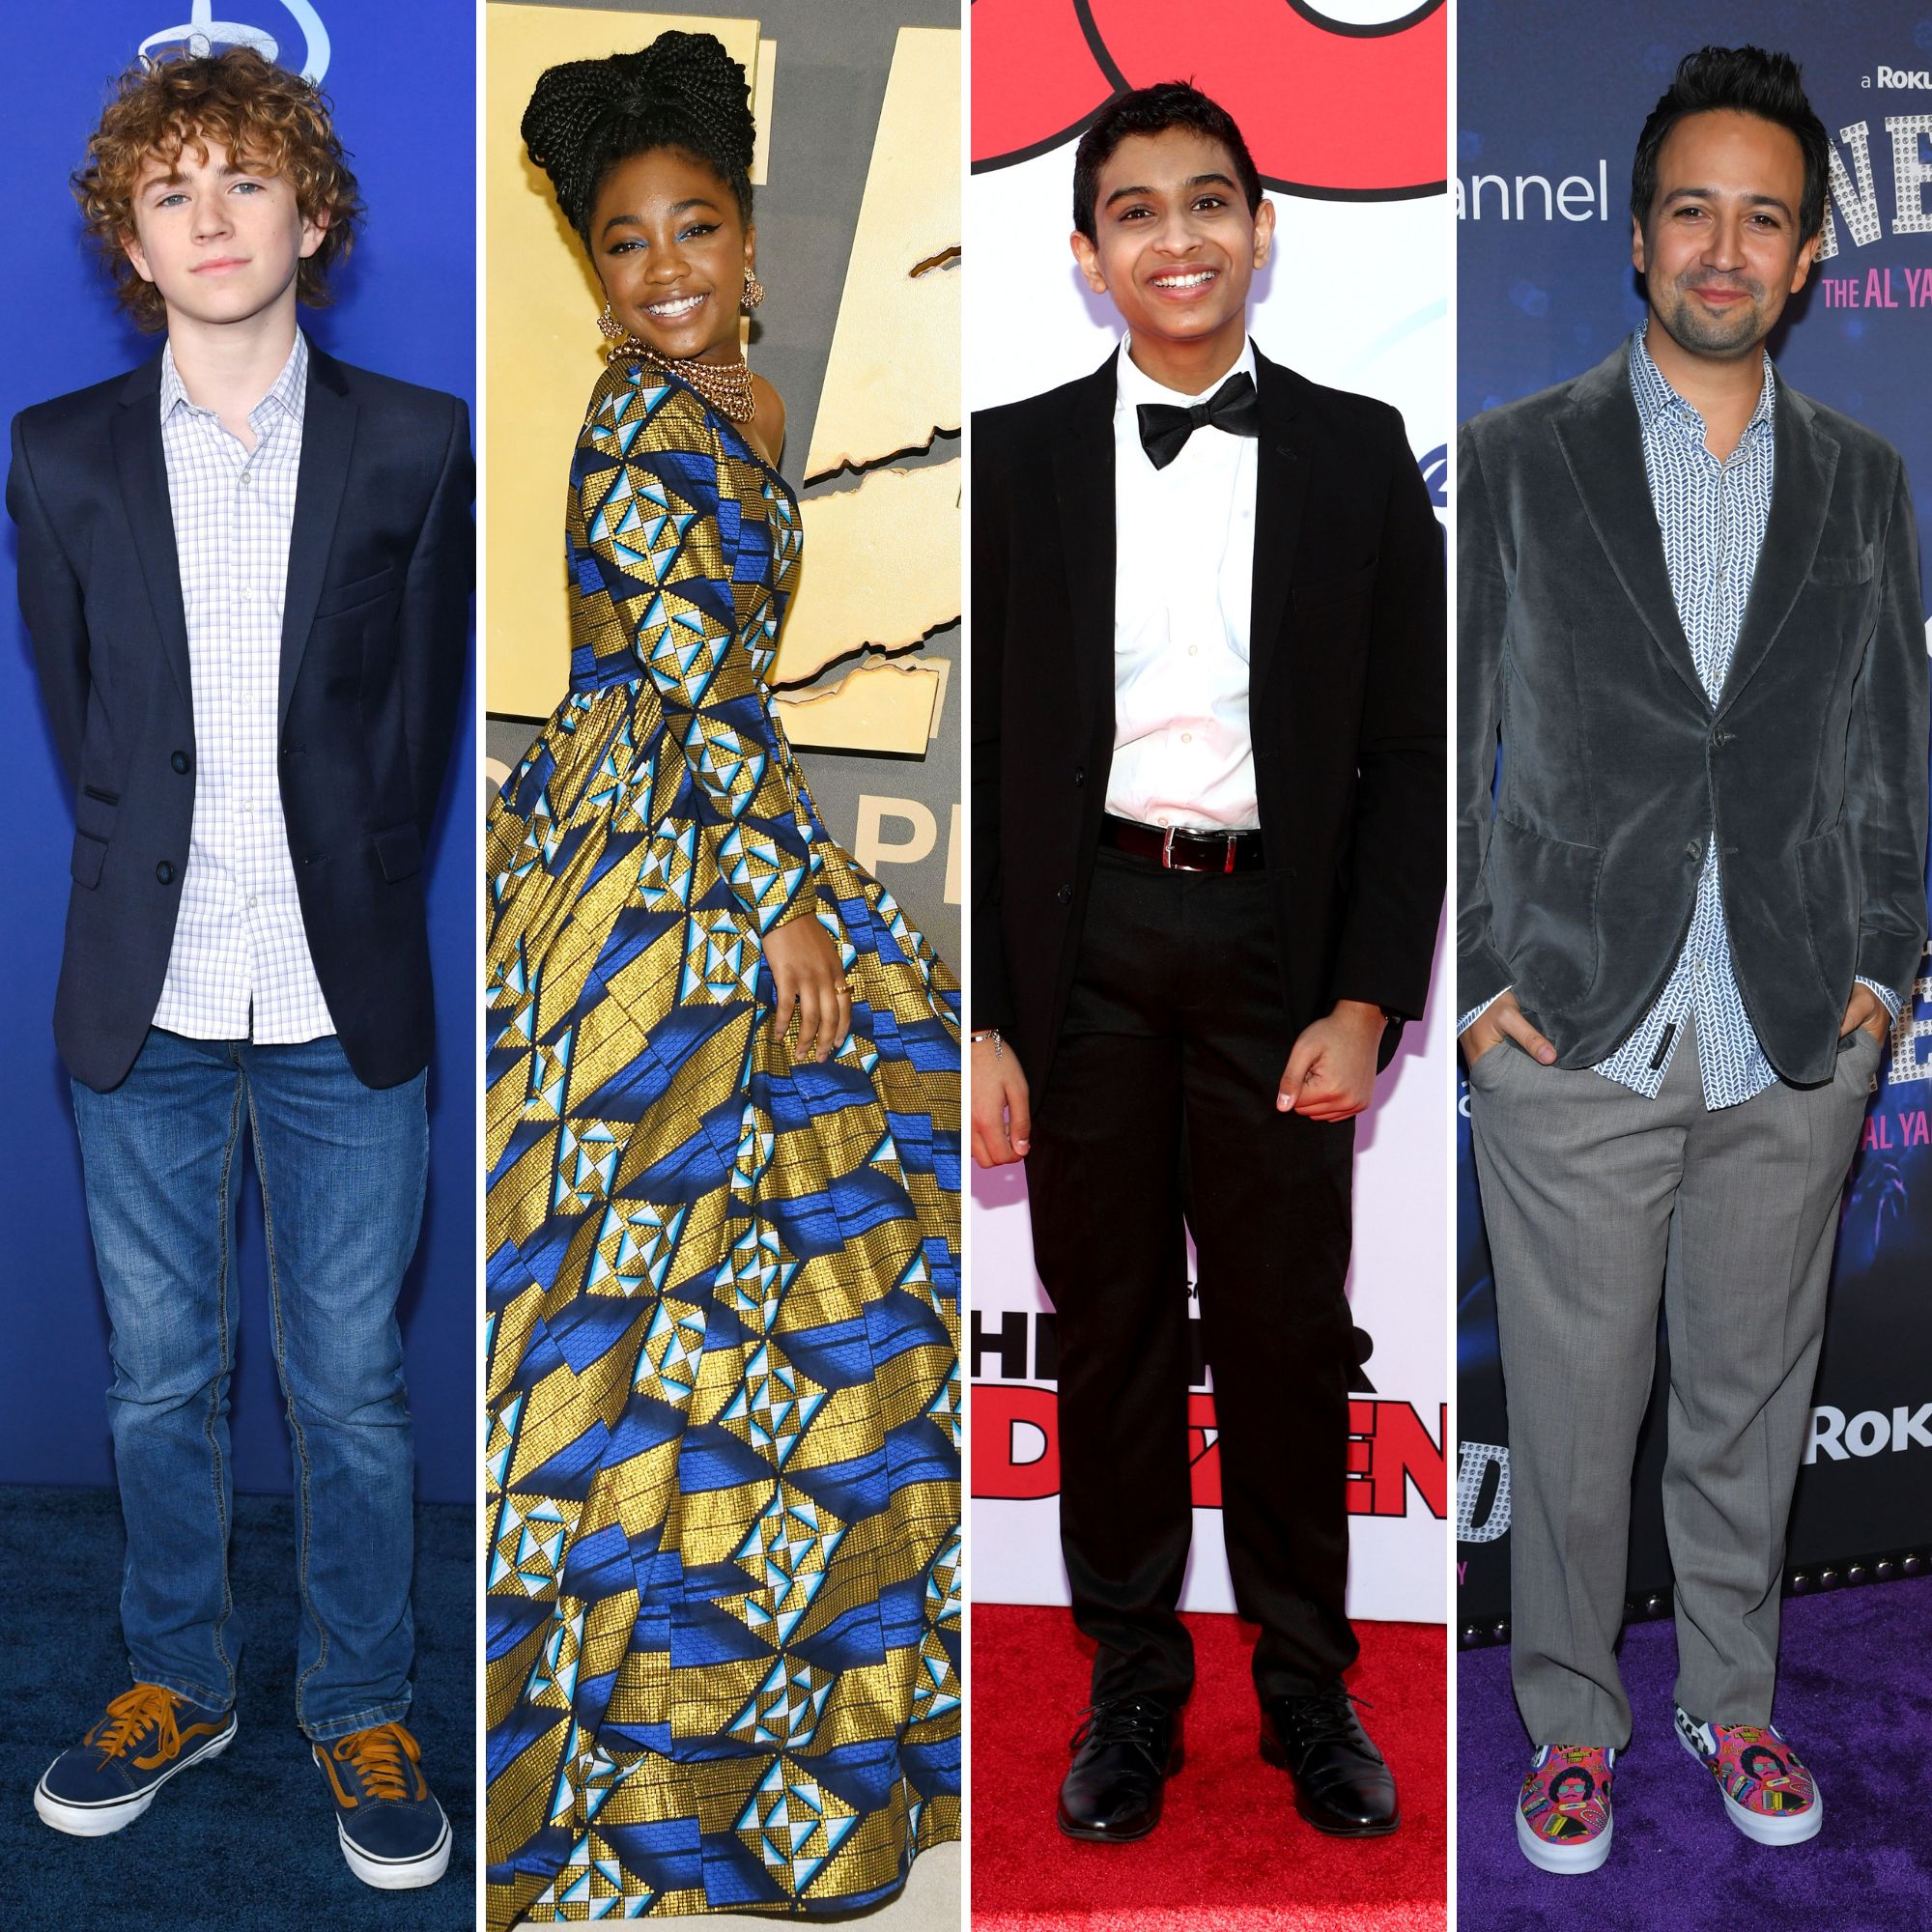 Check out who all are the latest addition to 'Percy Jackson' star cast